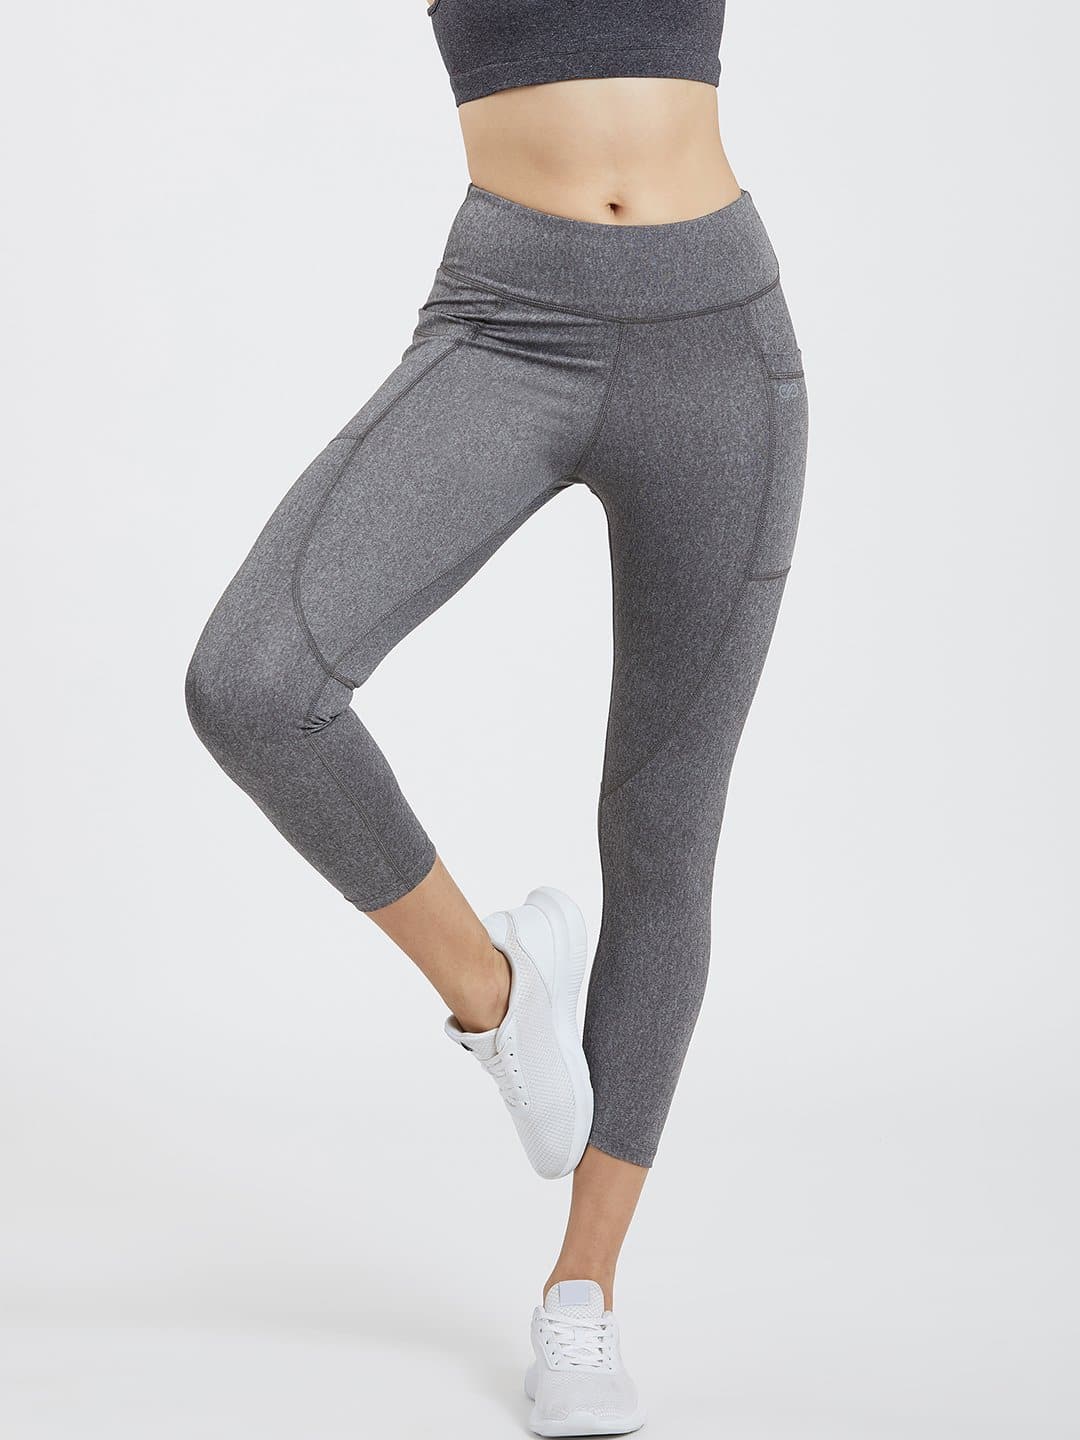 Maxtreme Power me Charcoal Marl Ankle Pocket Leggings